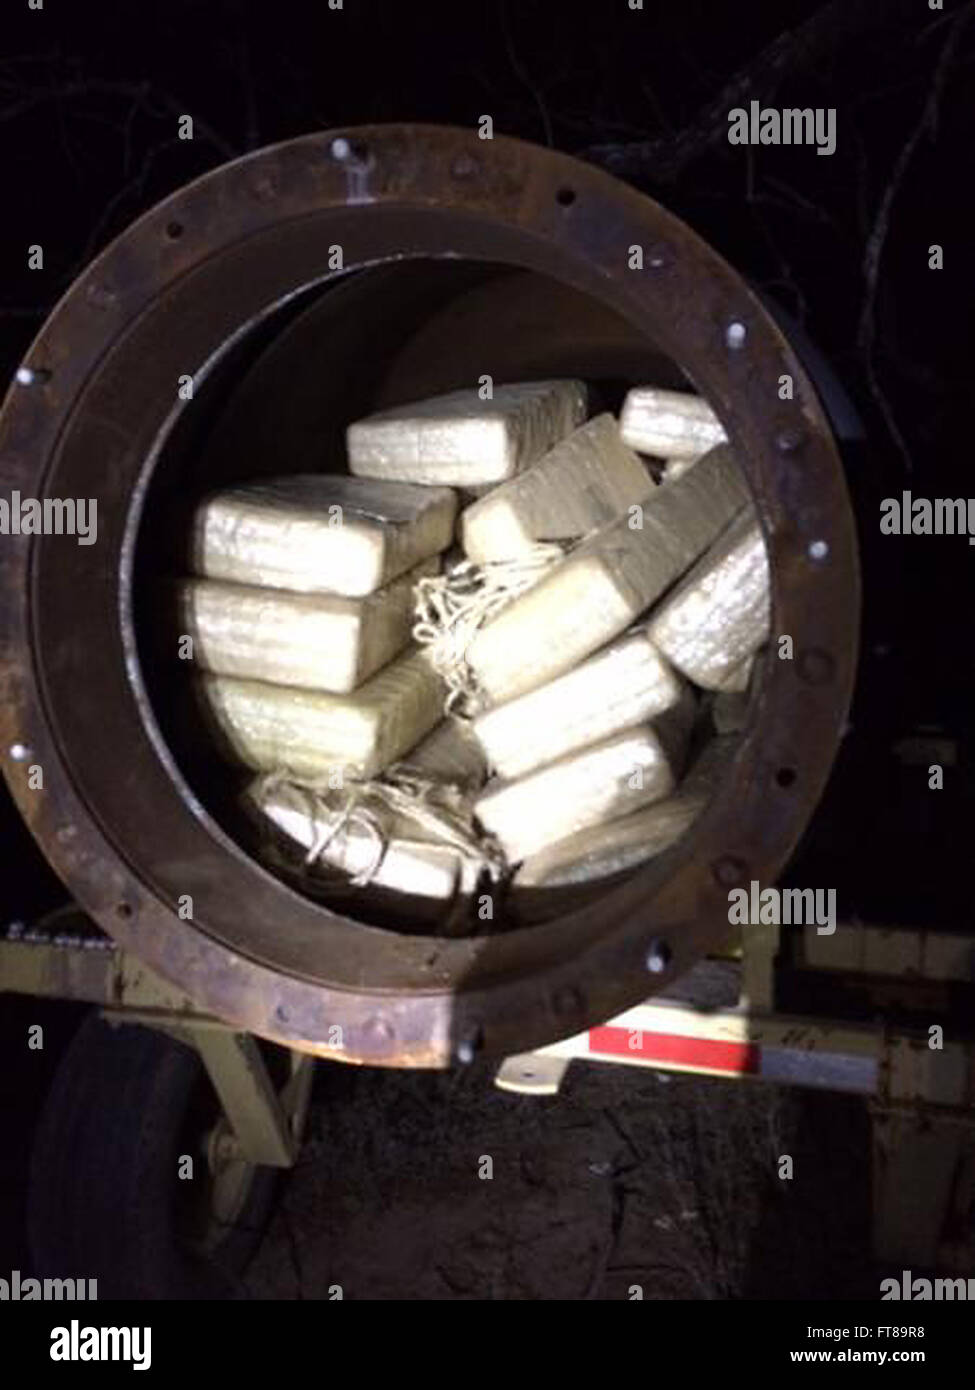 LA ROSITA, Texas – U.S. Border Patrol agents from the Rio Grande Valley Sector confiscated close to $1 million worth of marijuana stored inside metal tanker. Photo provided by U.S. Customs and Border Protection Stock Photo